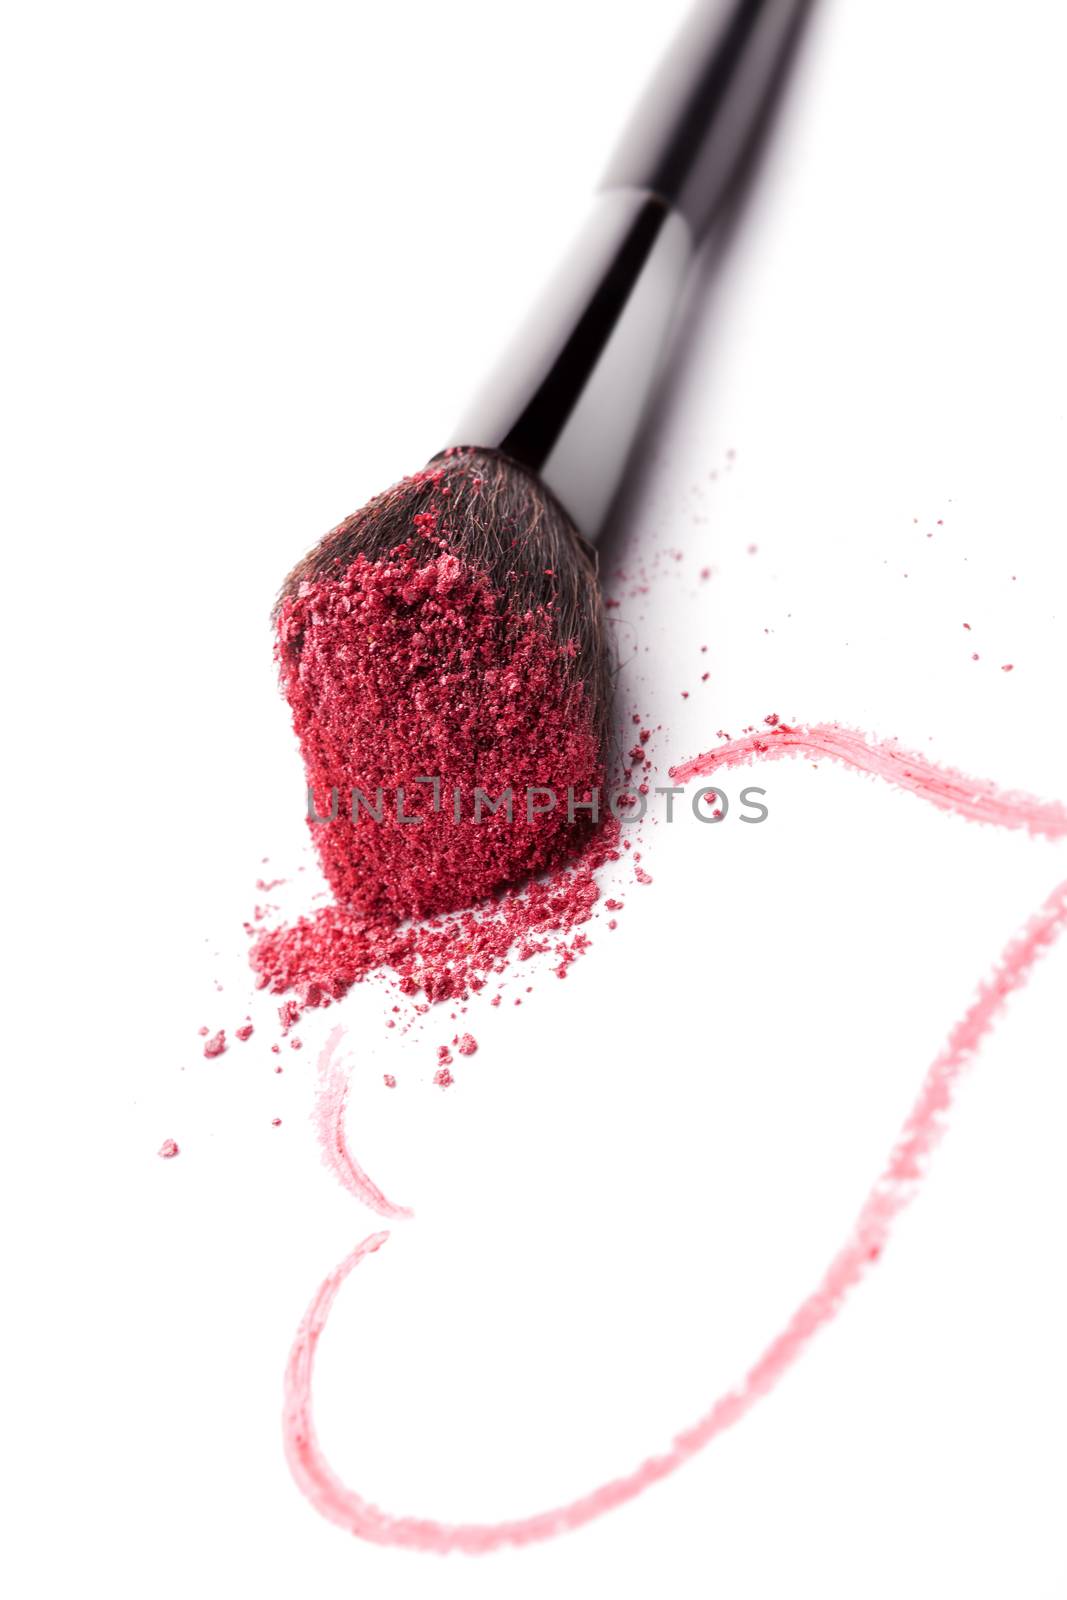 Glamour makeup background. Brush with purple makeup powder and heart drawn with lipstick isolated on white background. Beauty and love background.